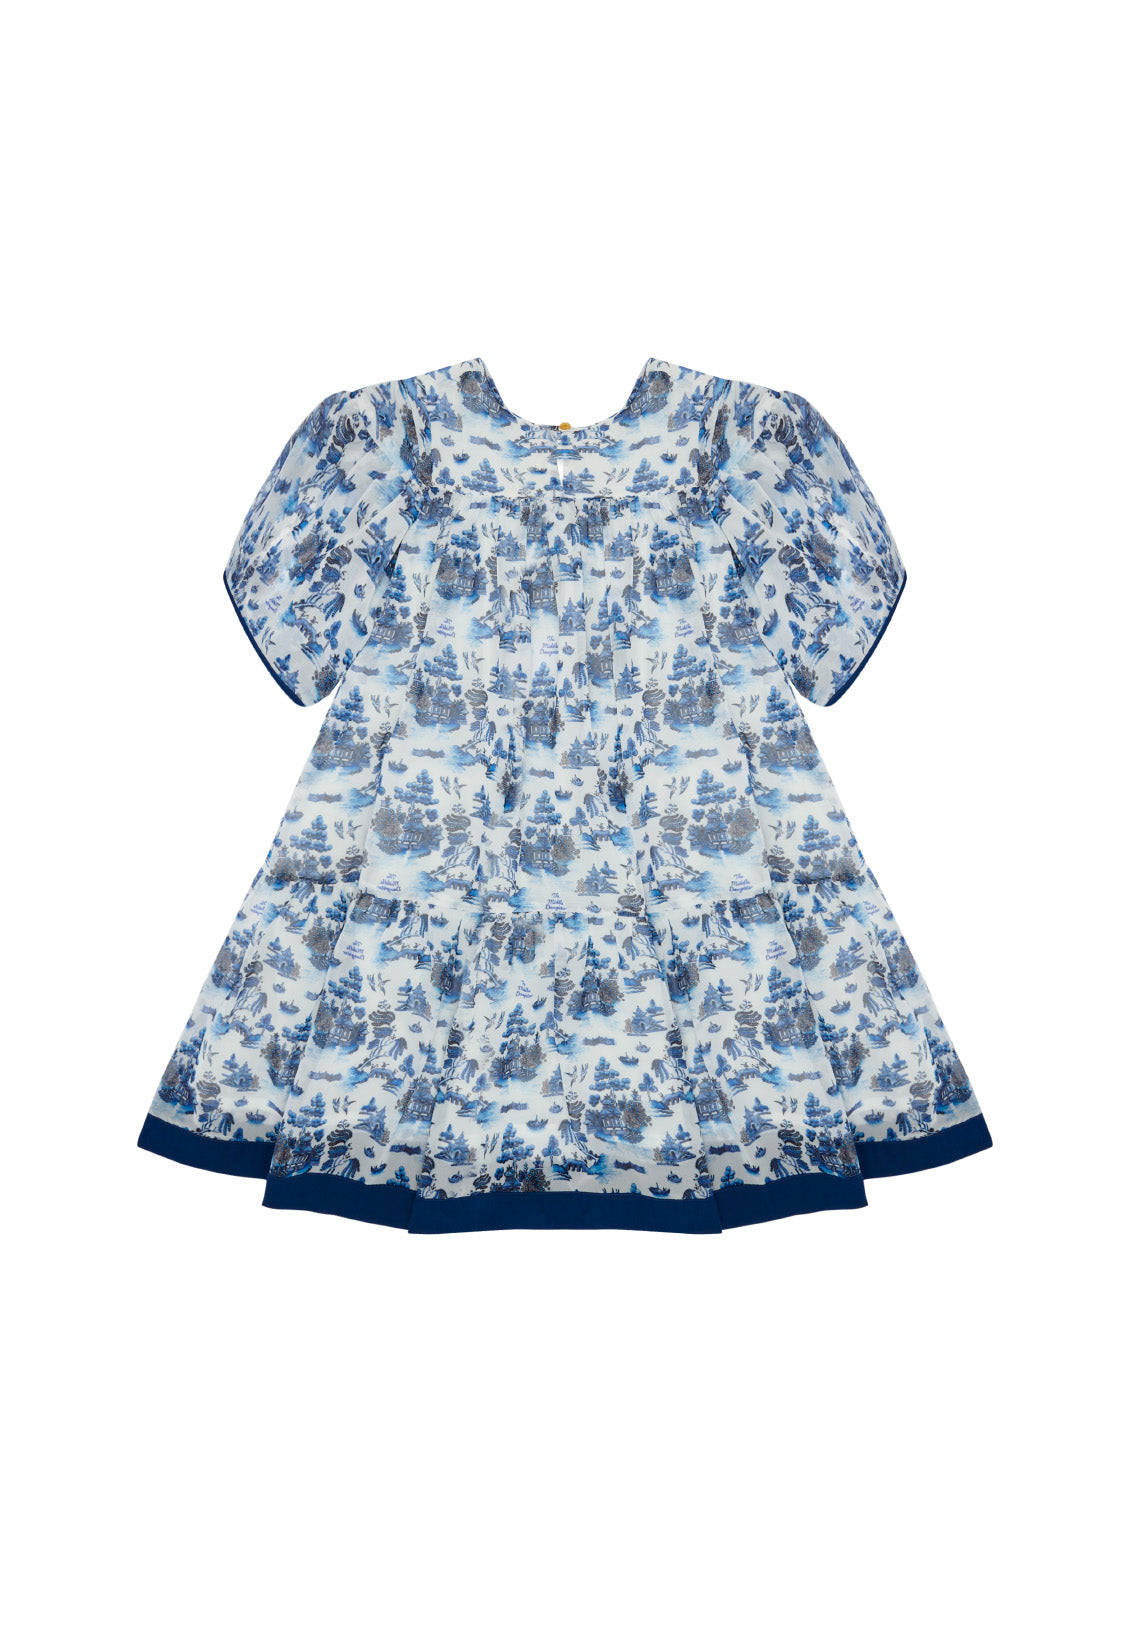 THE MIDDLE DAUGHTER "FLOAT YOUR BOAT" WILLOW PRINT DRESS